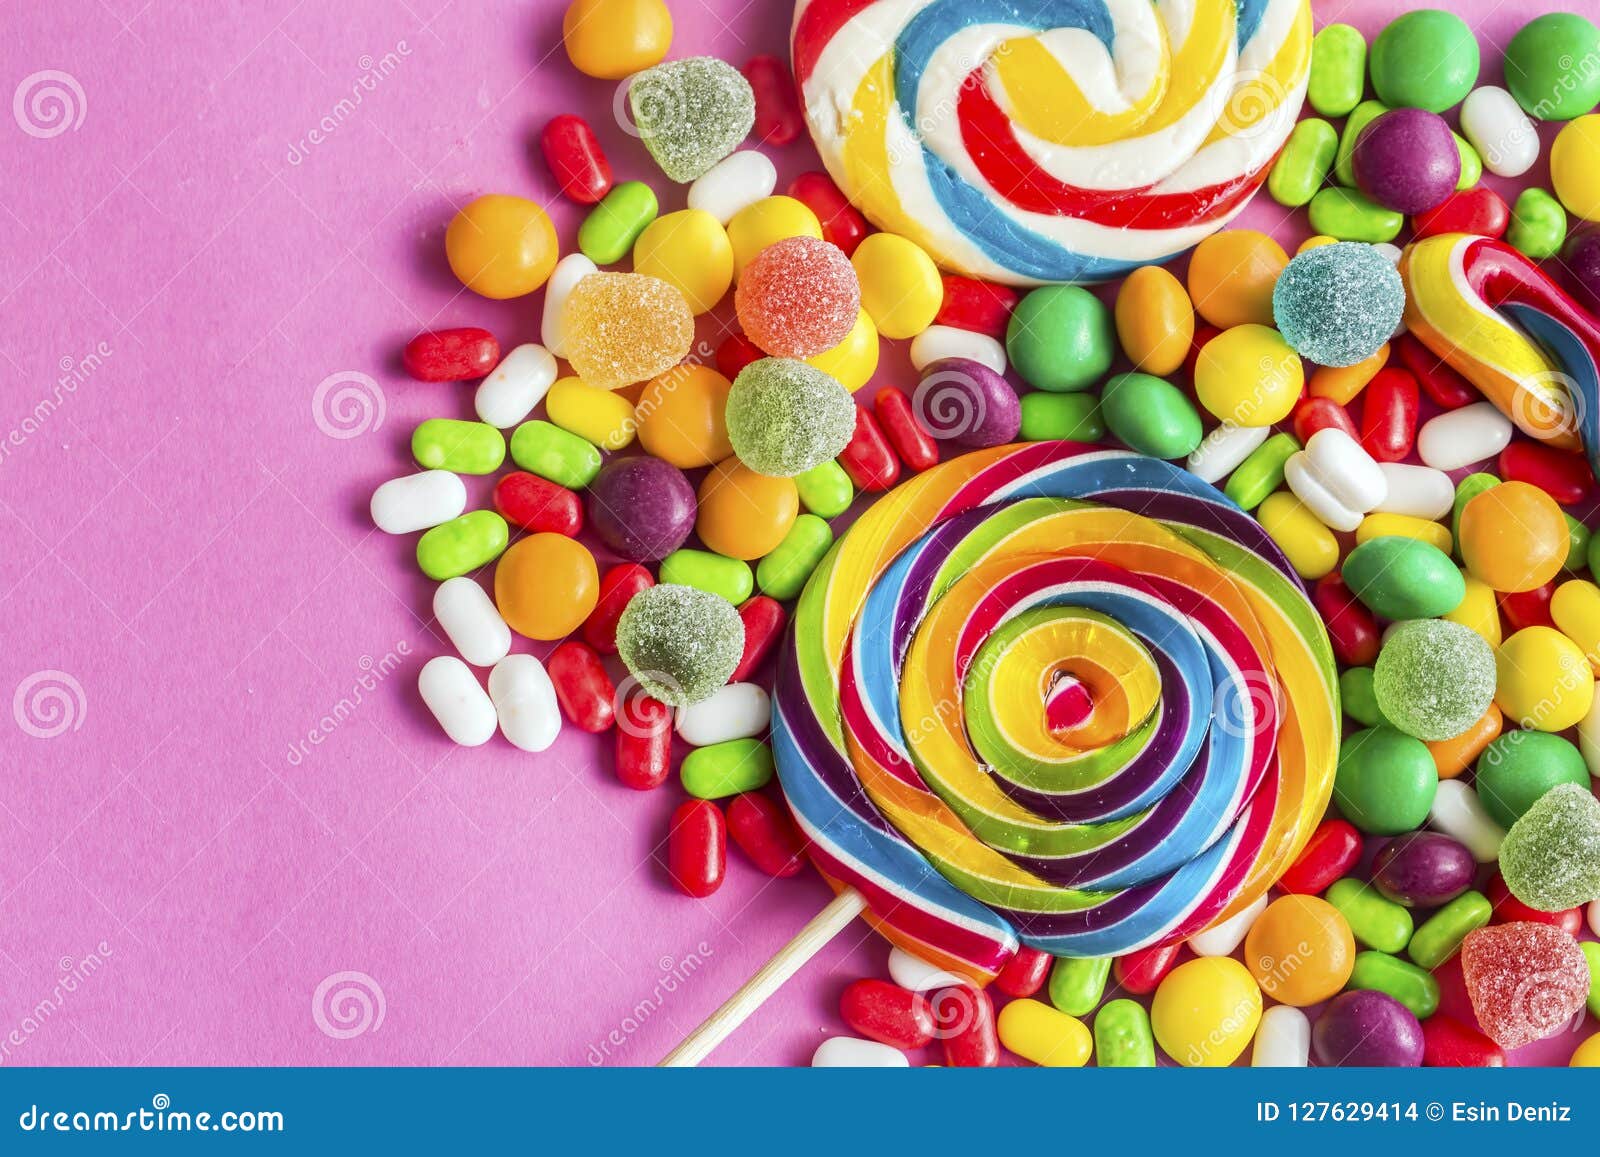 Colorful Lollipops And Different Colored Round Candy Stock Photo